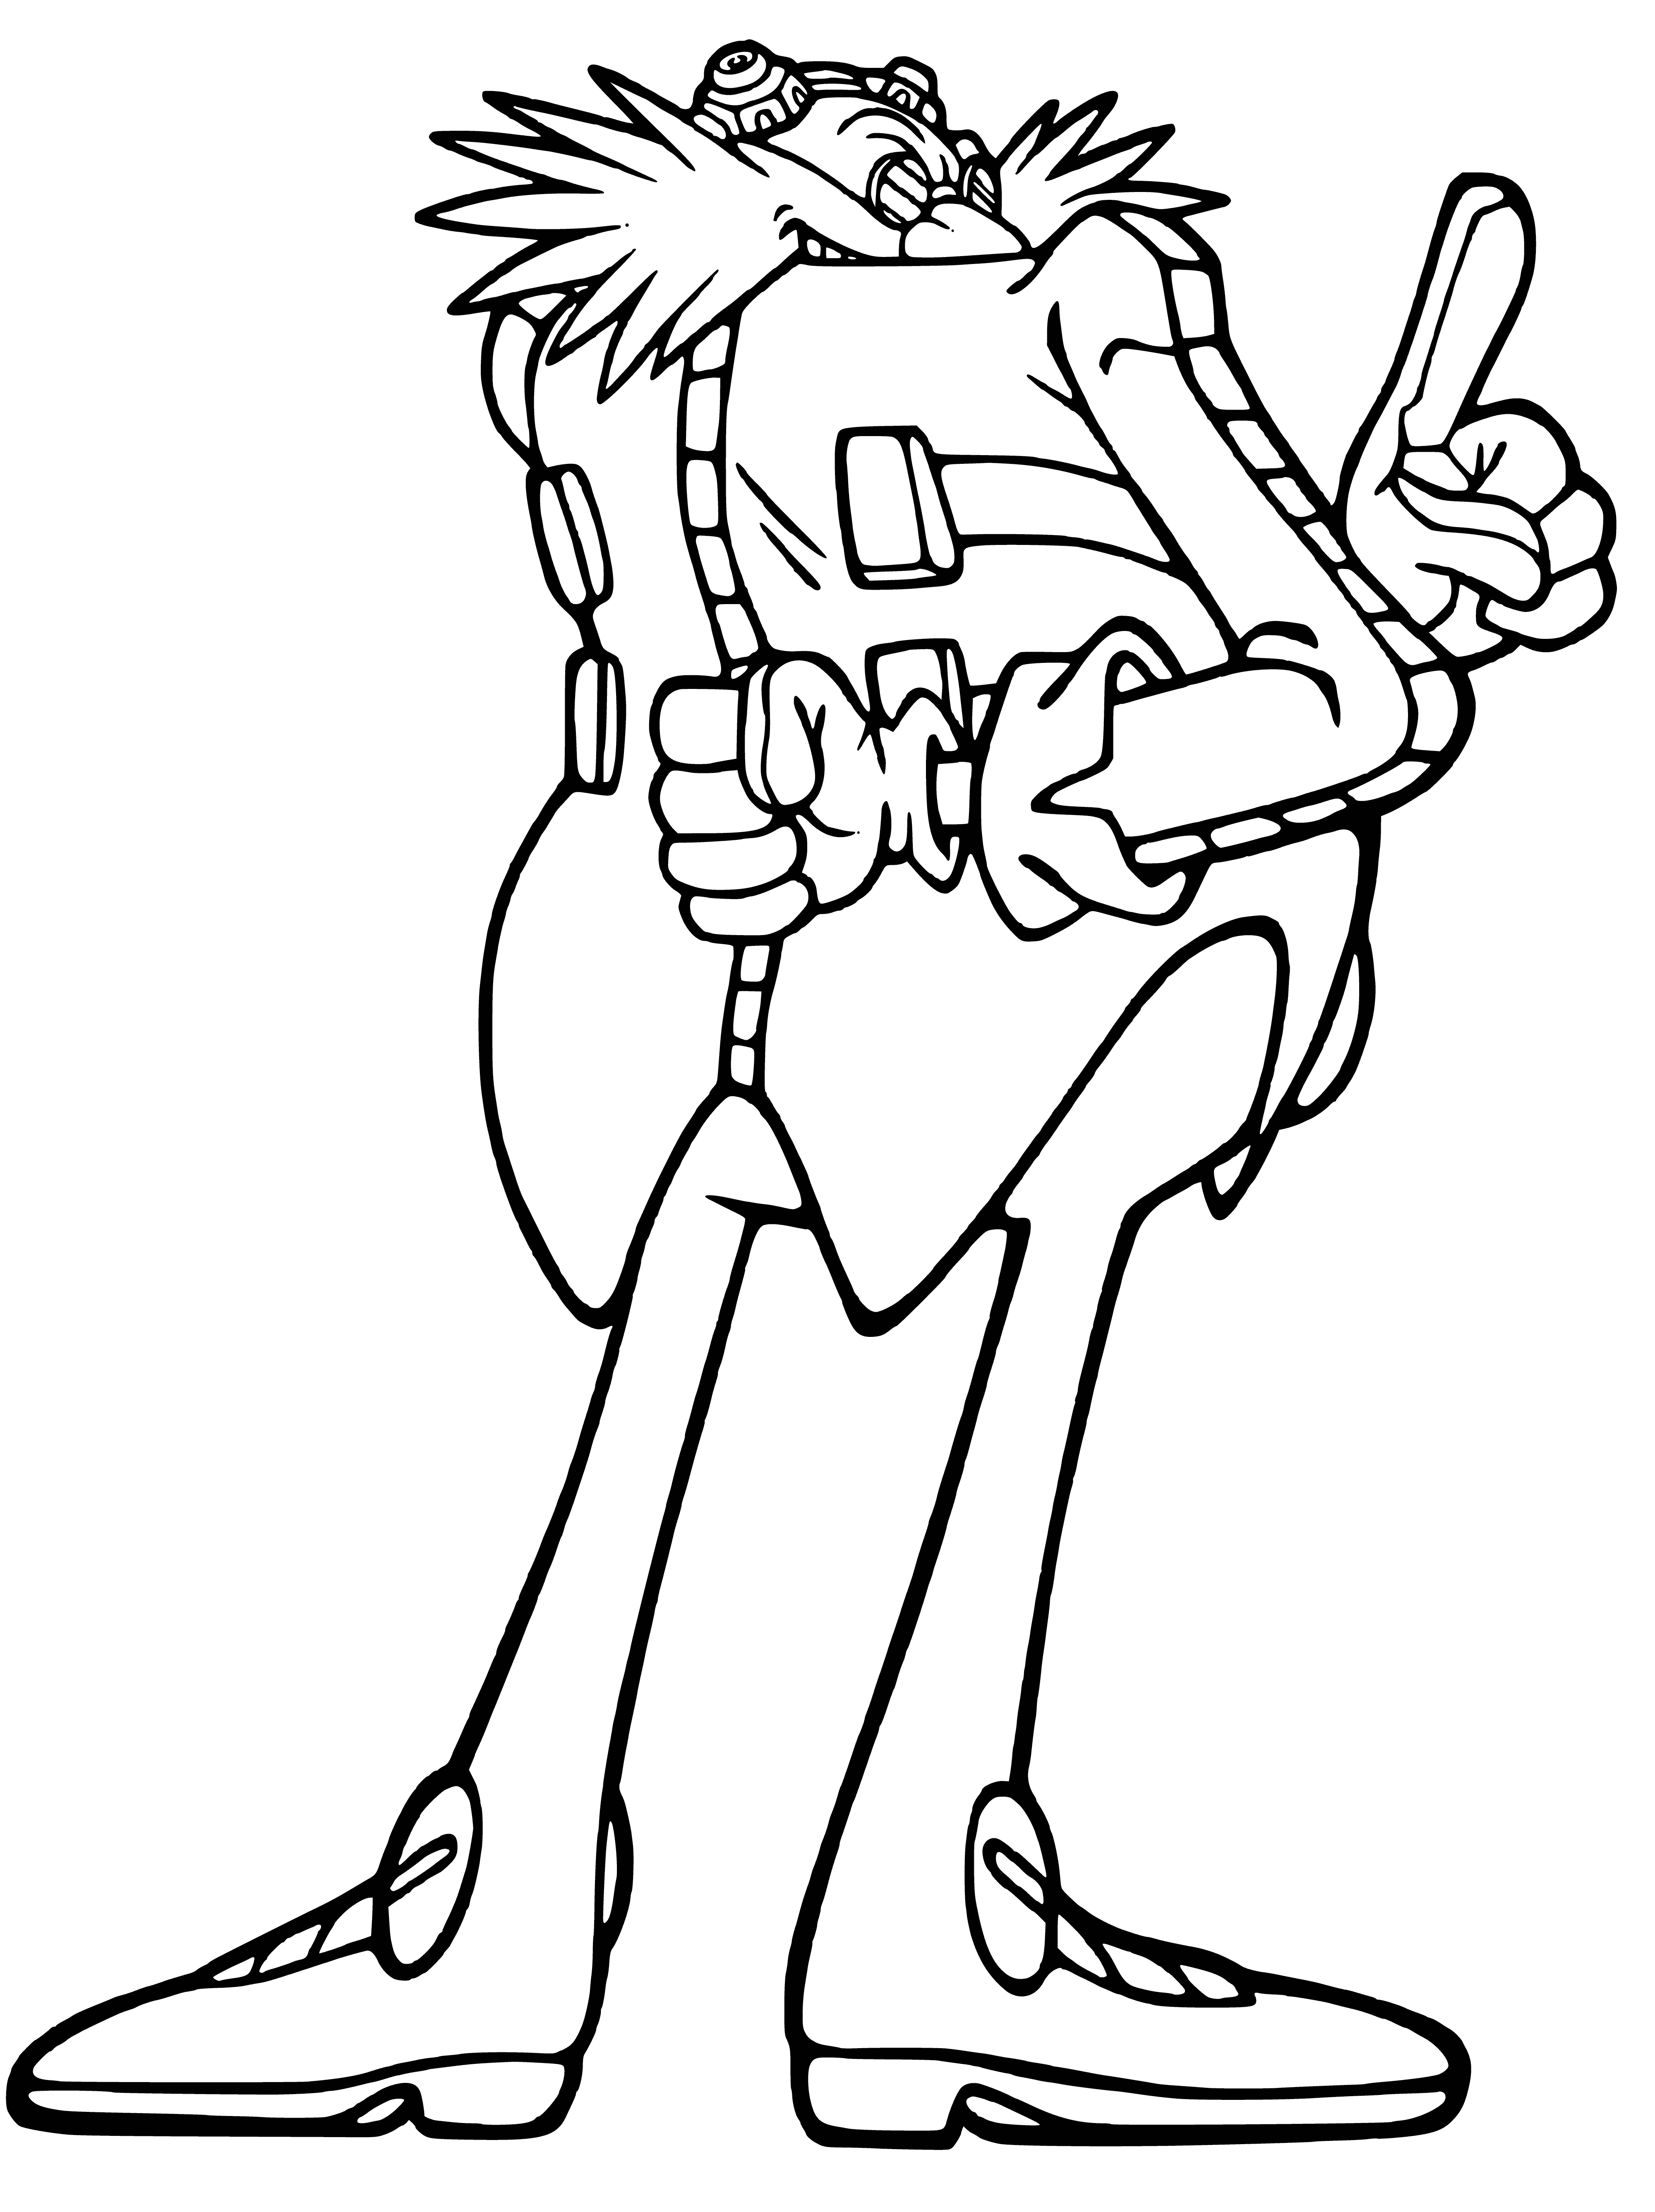 Dr. Eggman coloring page